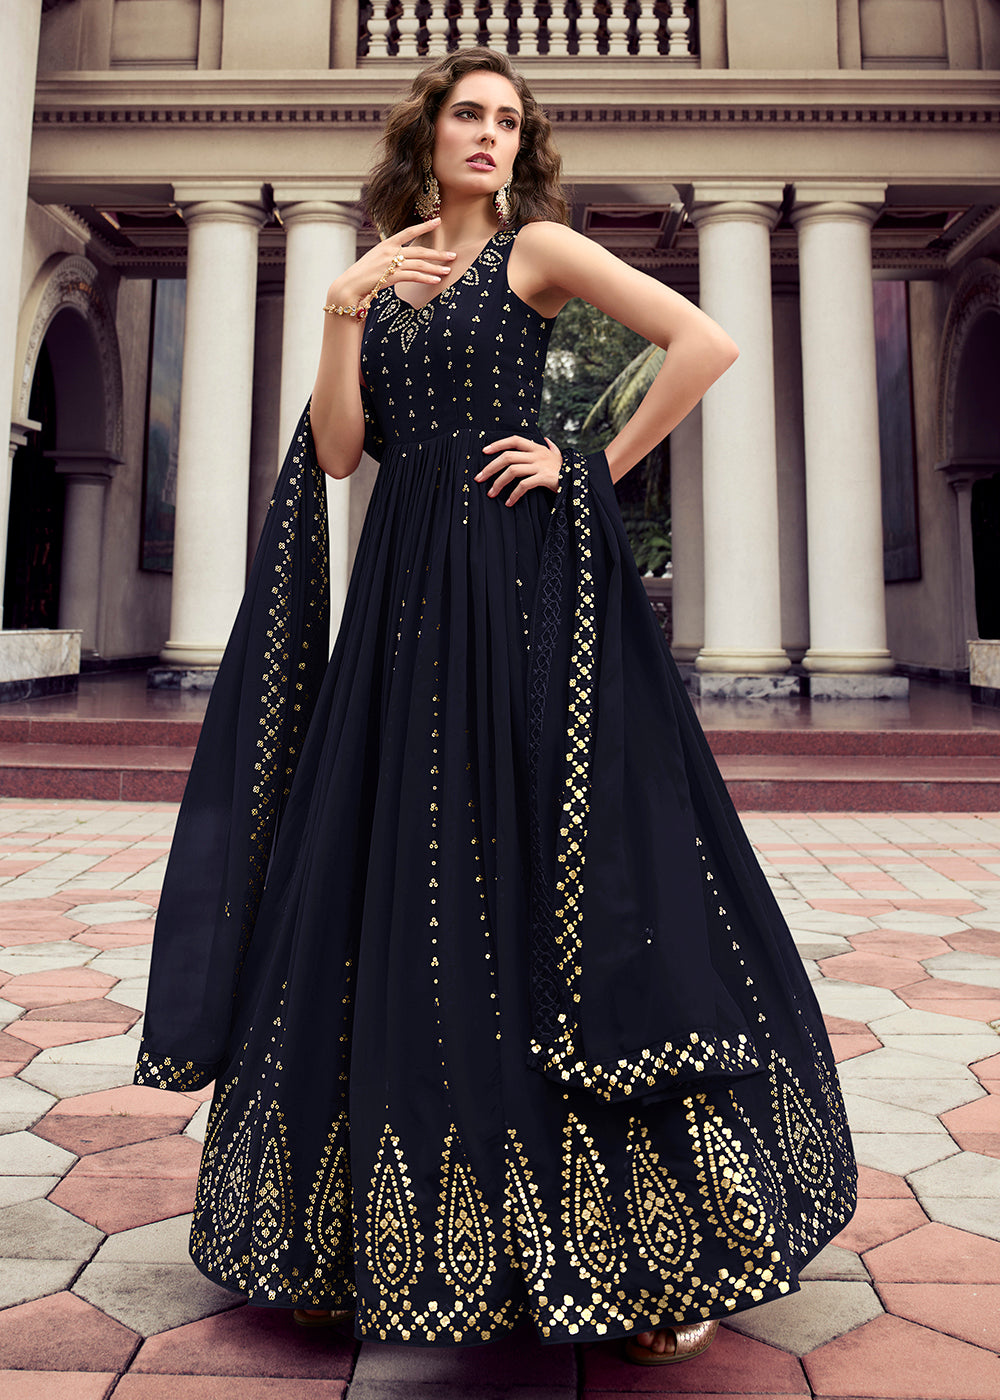 Details more than 159 black party gowns online india best